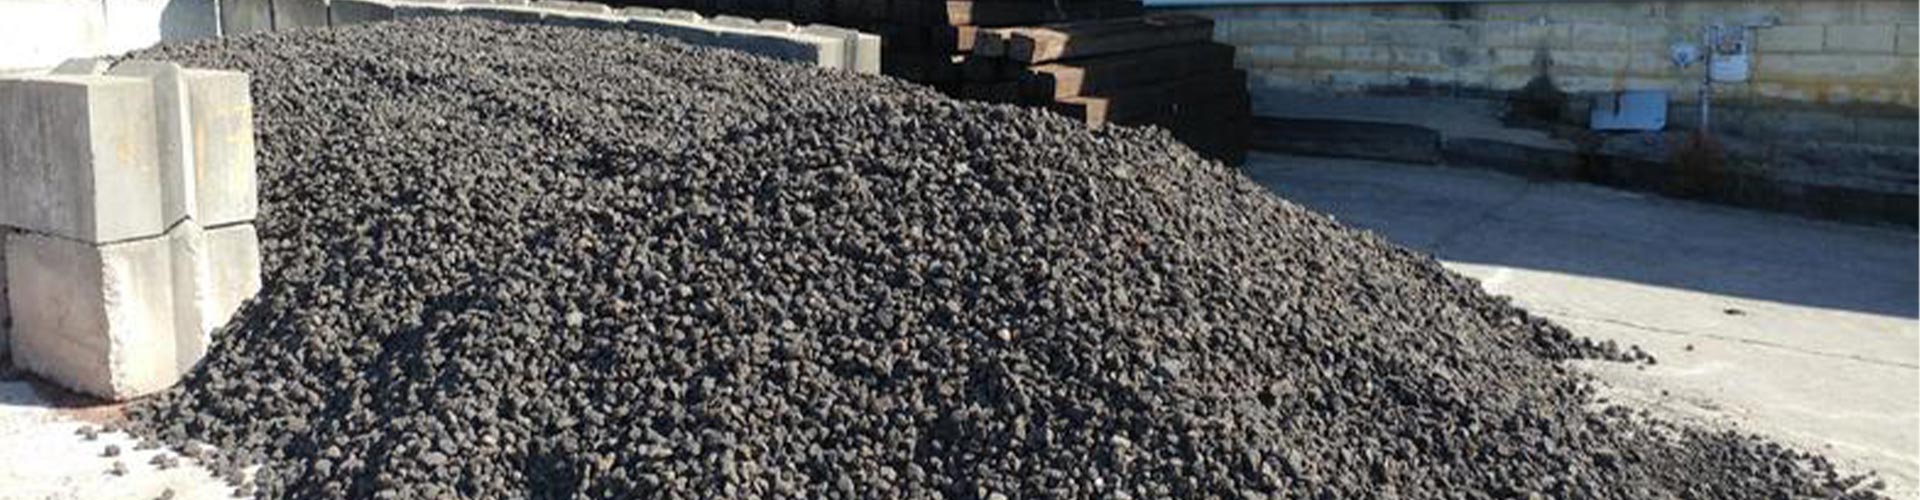 Decorative Gravel Delivery Service in Madison County, KY